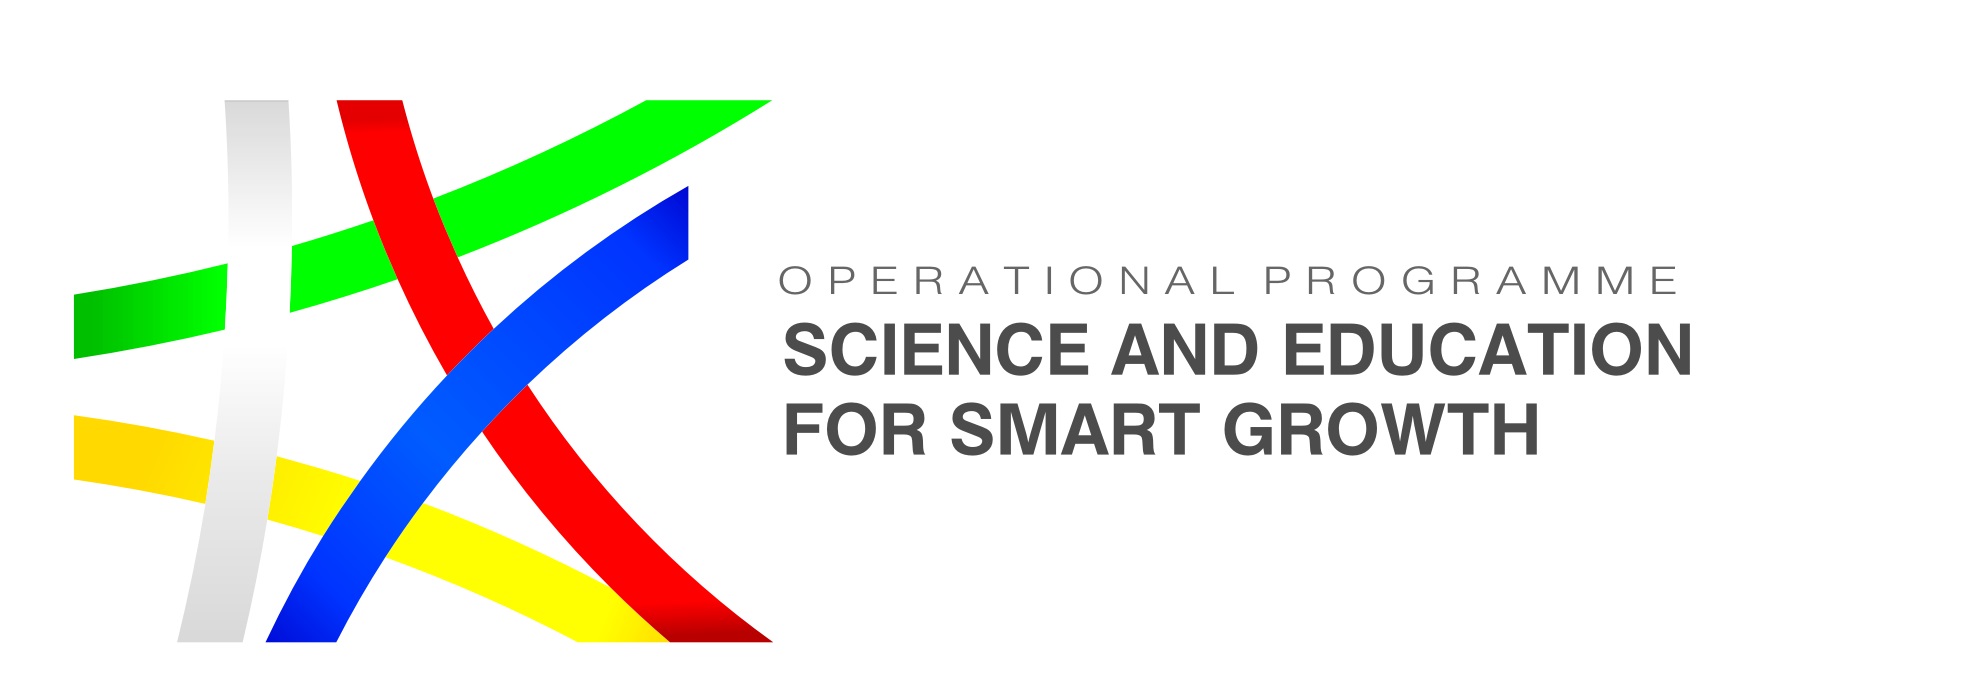 Operational Science and Education Program